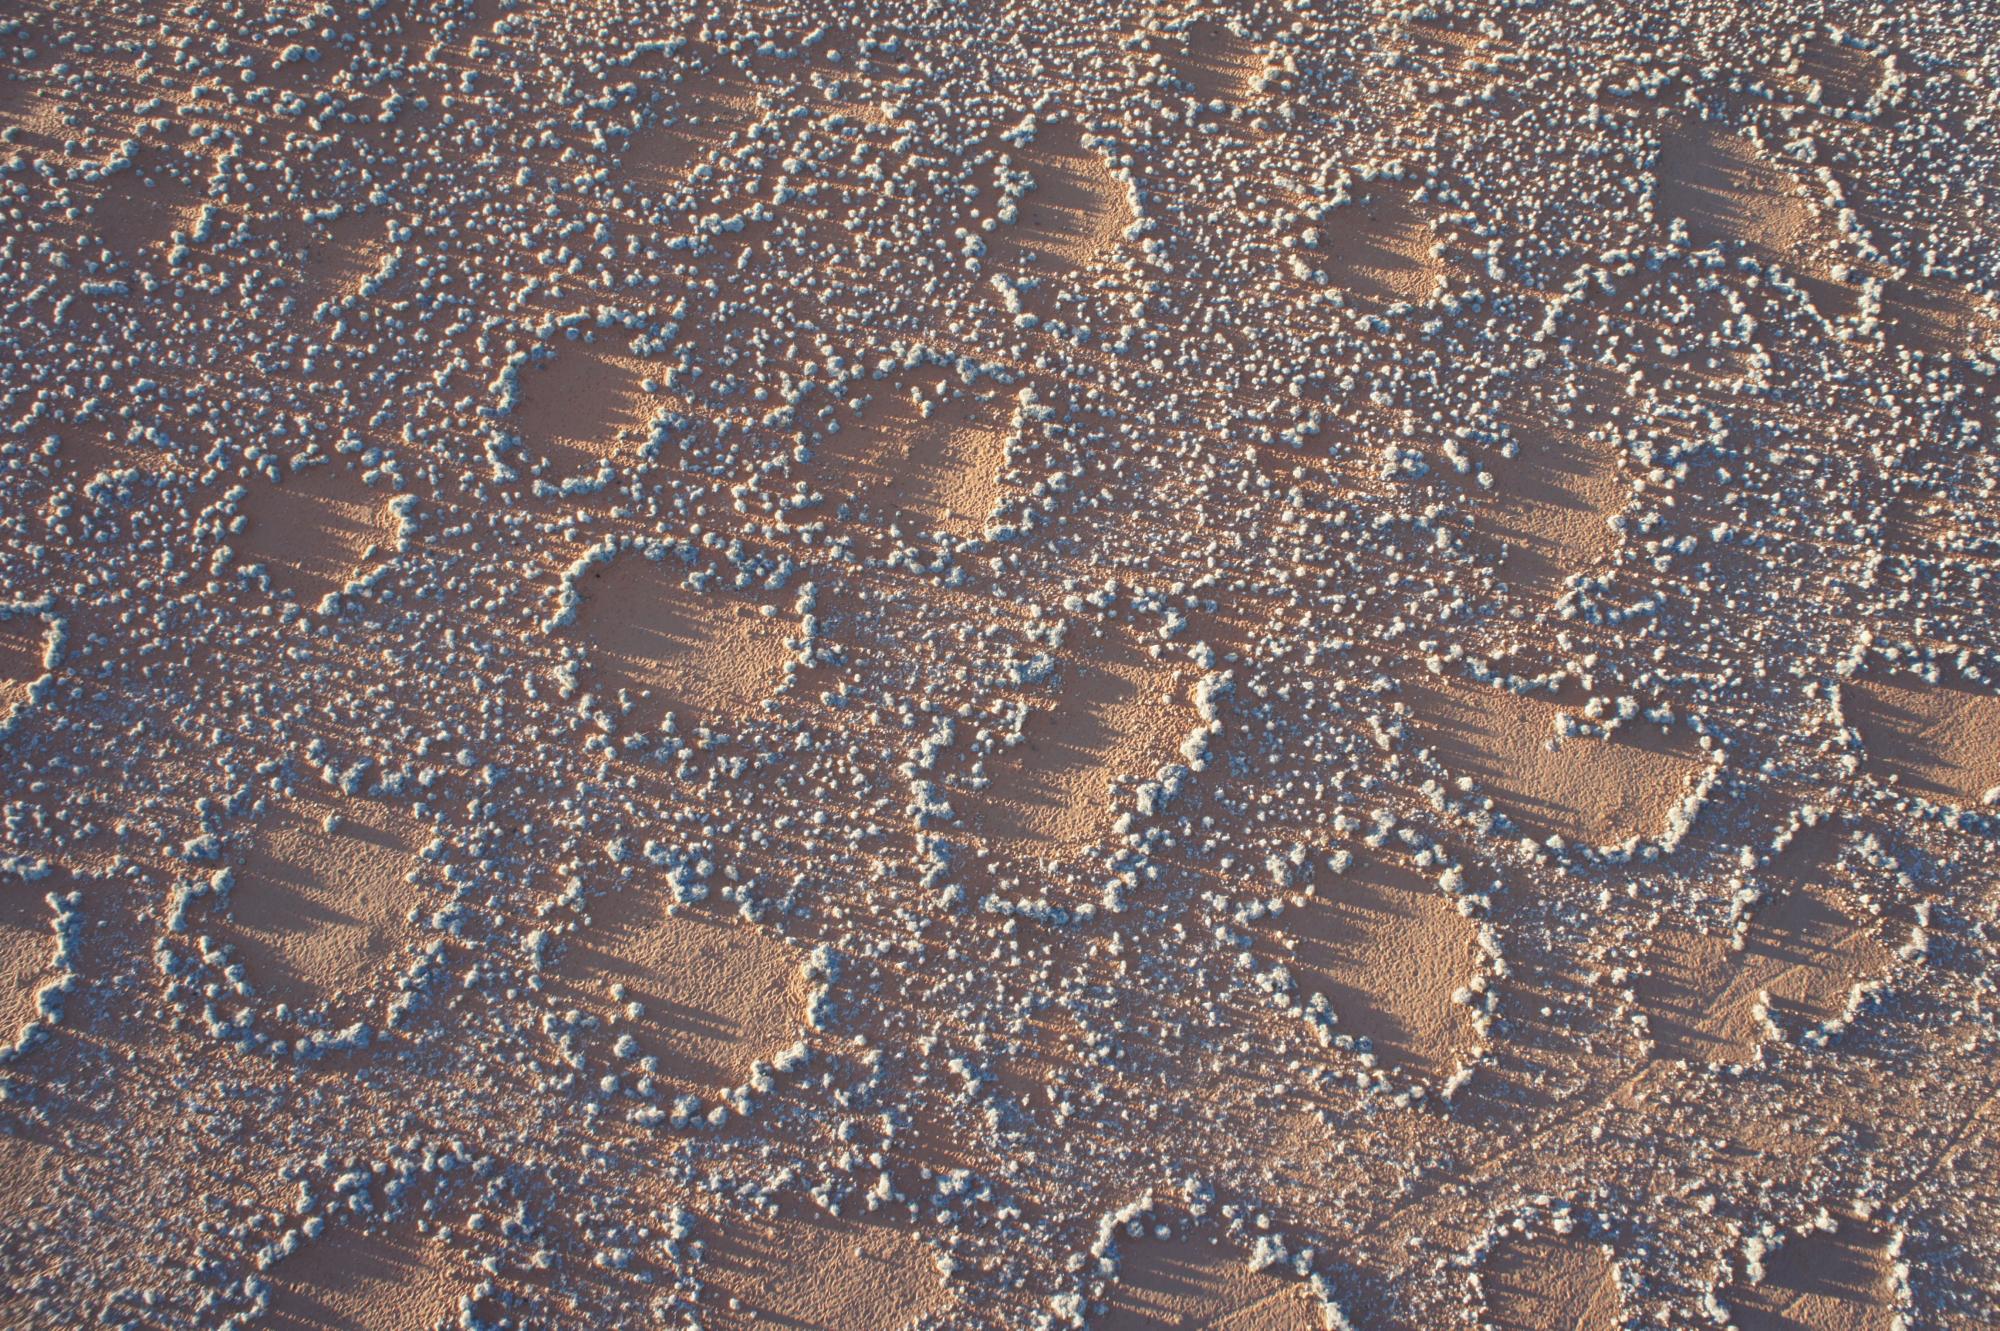 Solving the ecological mystery of Africa's fairy circles